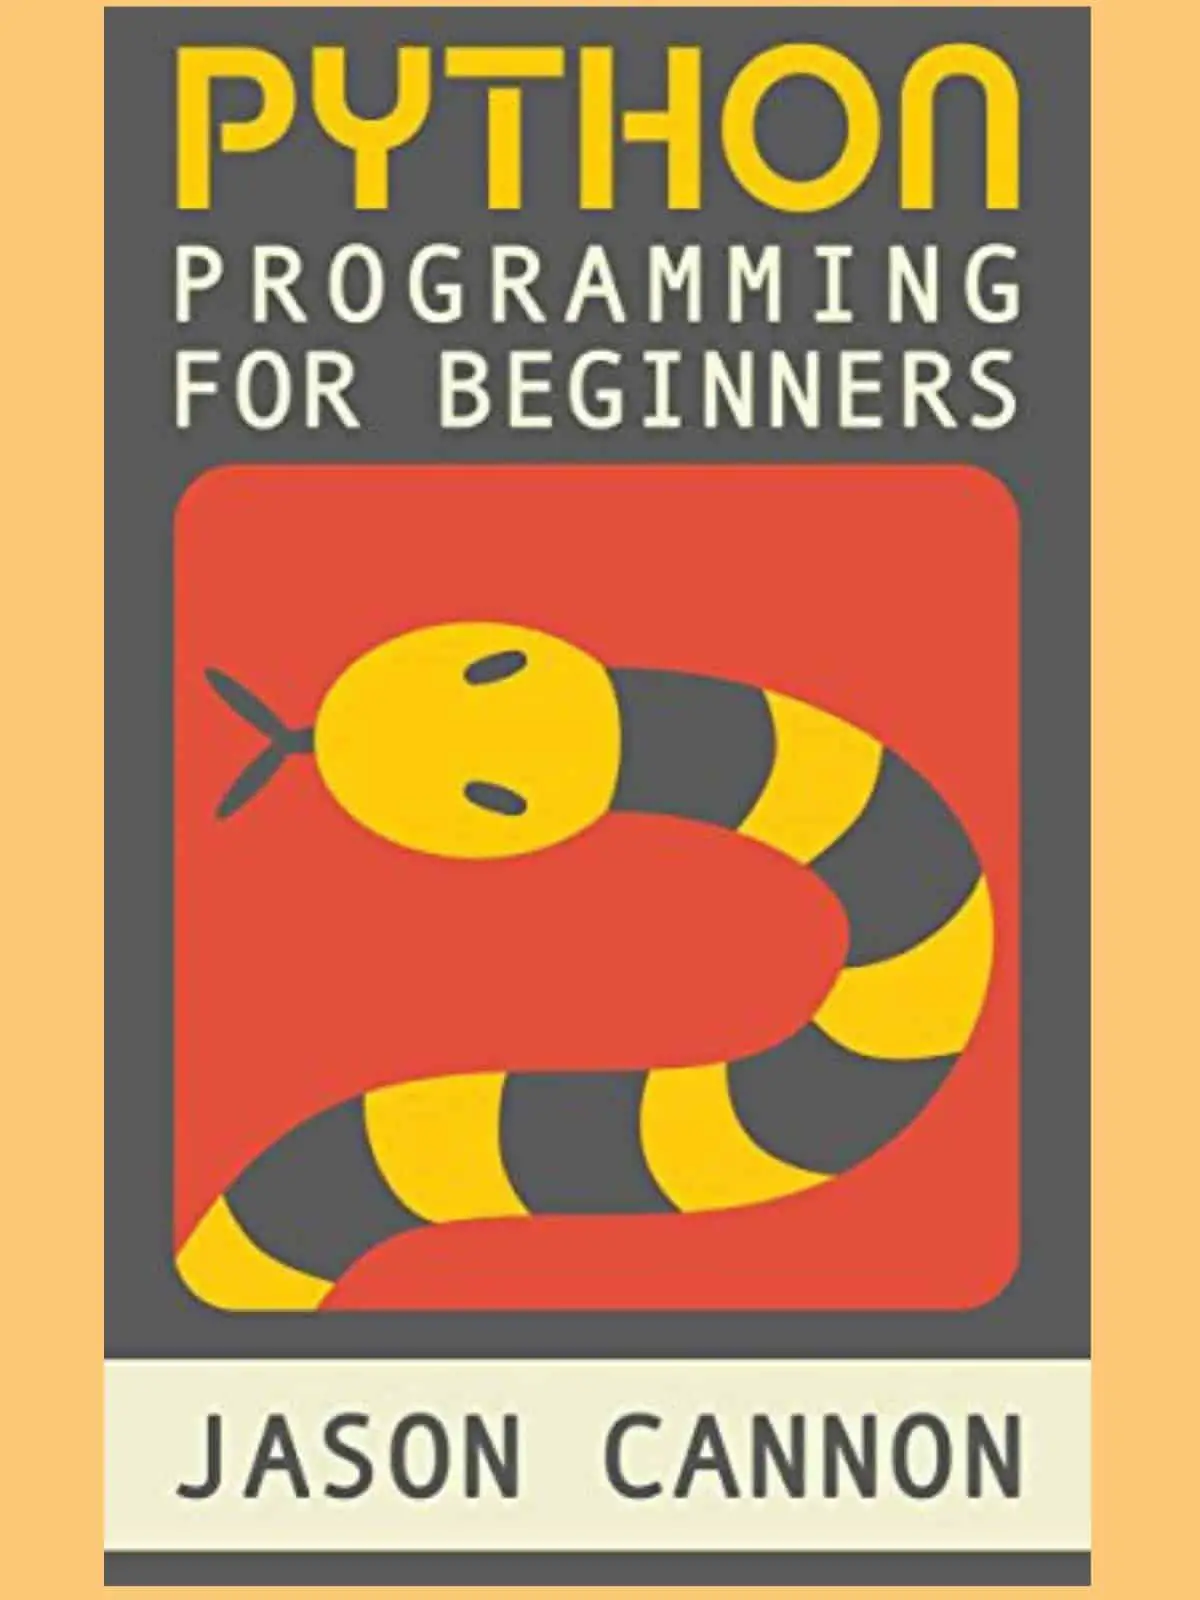 Python Programming For Beginners by Jason Cannon ($2.99) | Amazon's Best Selling Tech Kindle eBooks